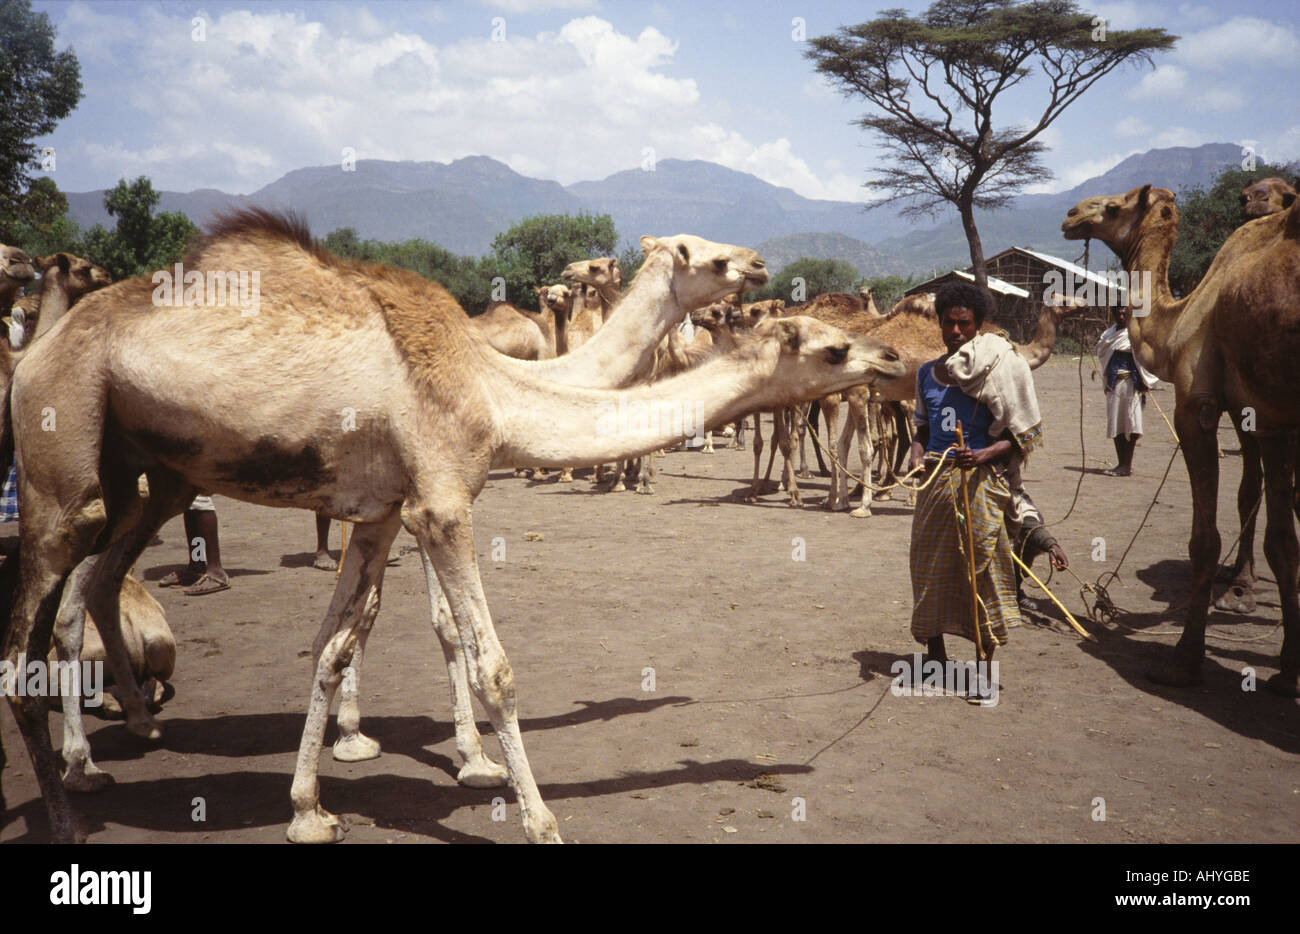 Camel and cattle market in Mekoni. Ethiopia Stock Photo